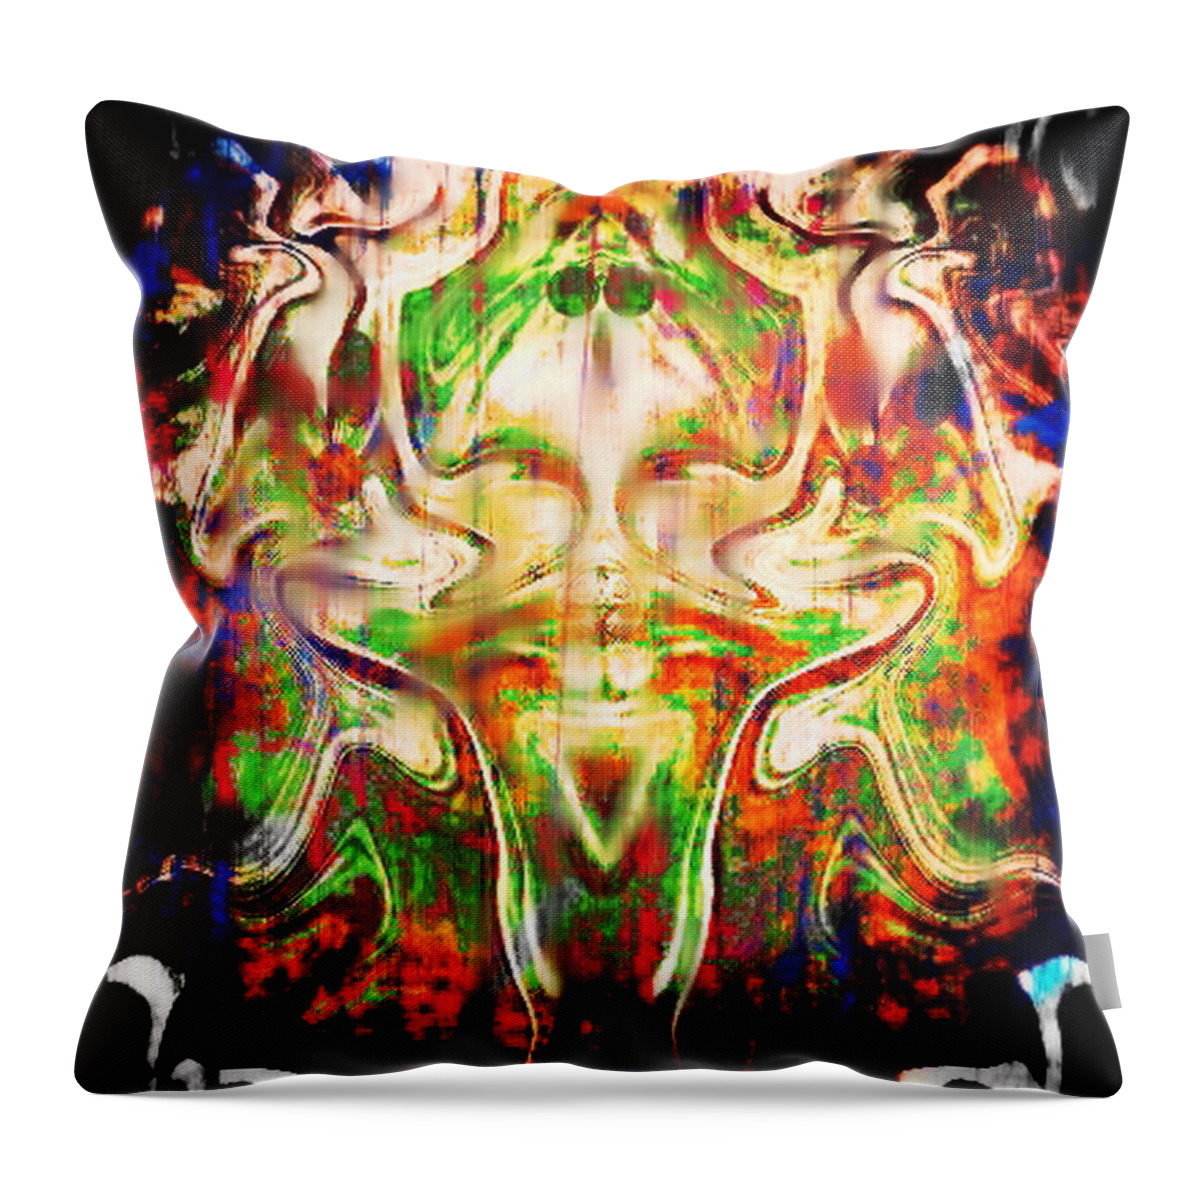 Faces Throw Pillow featuring the digital art Clover Spell by Rindi Rehs